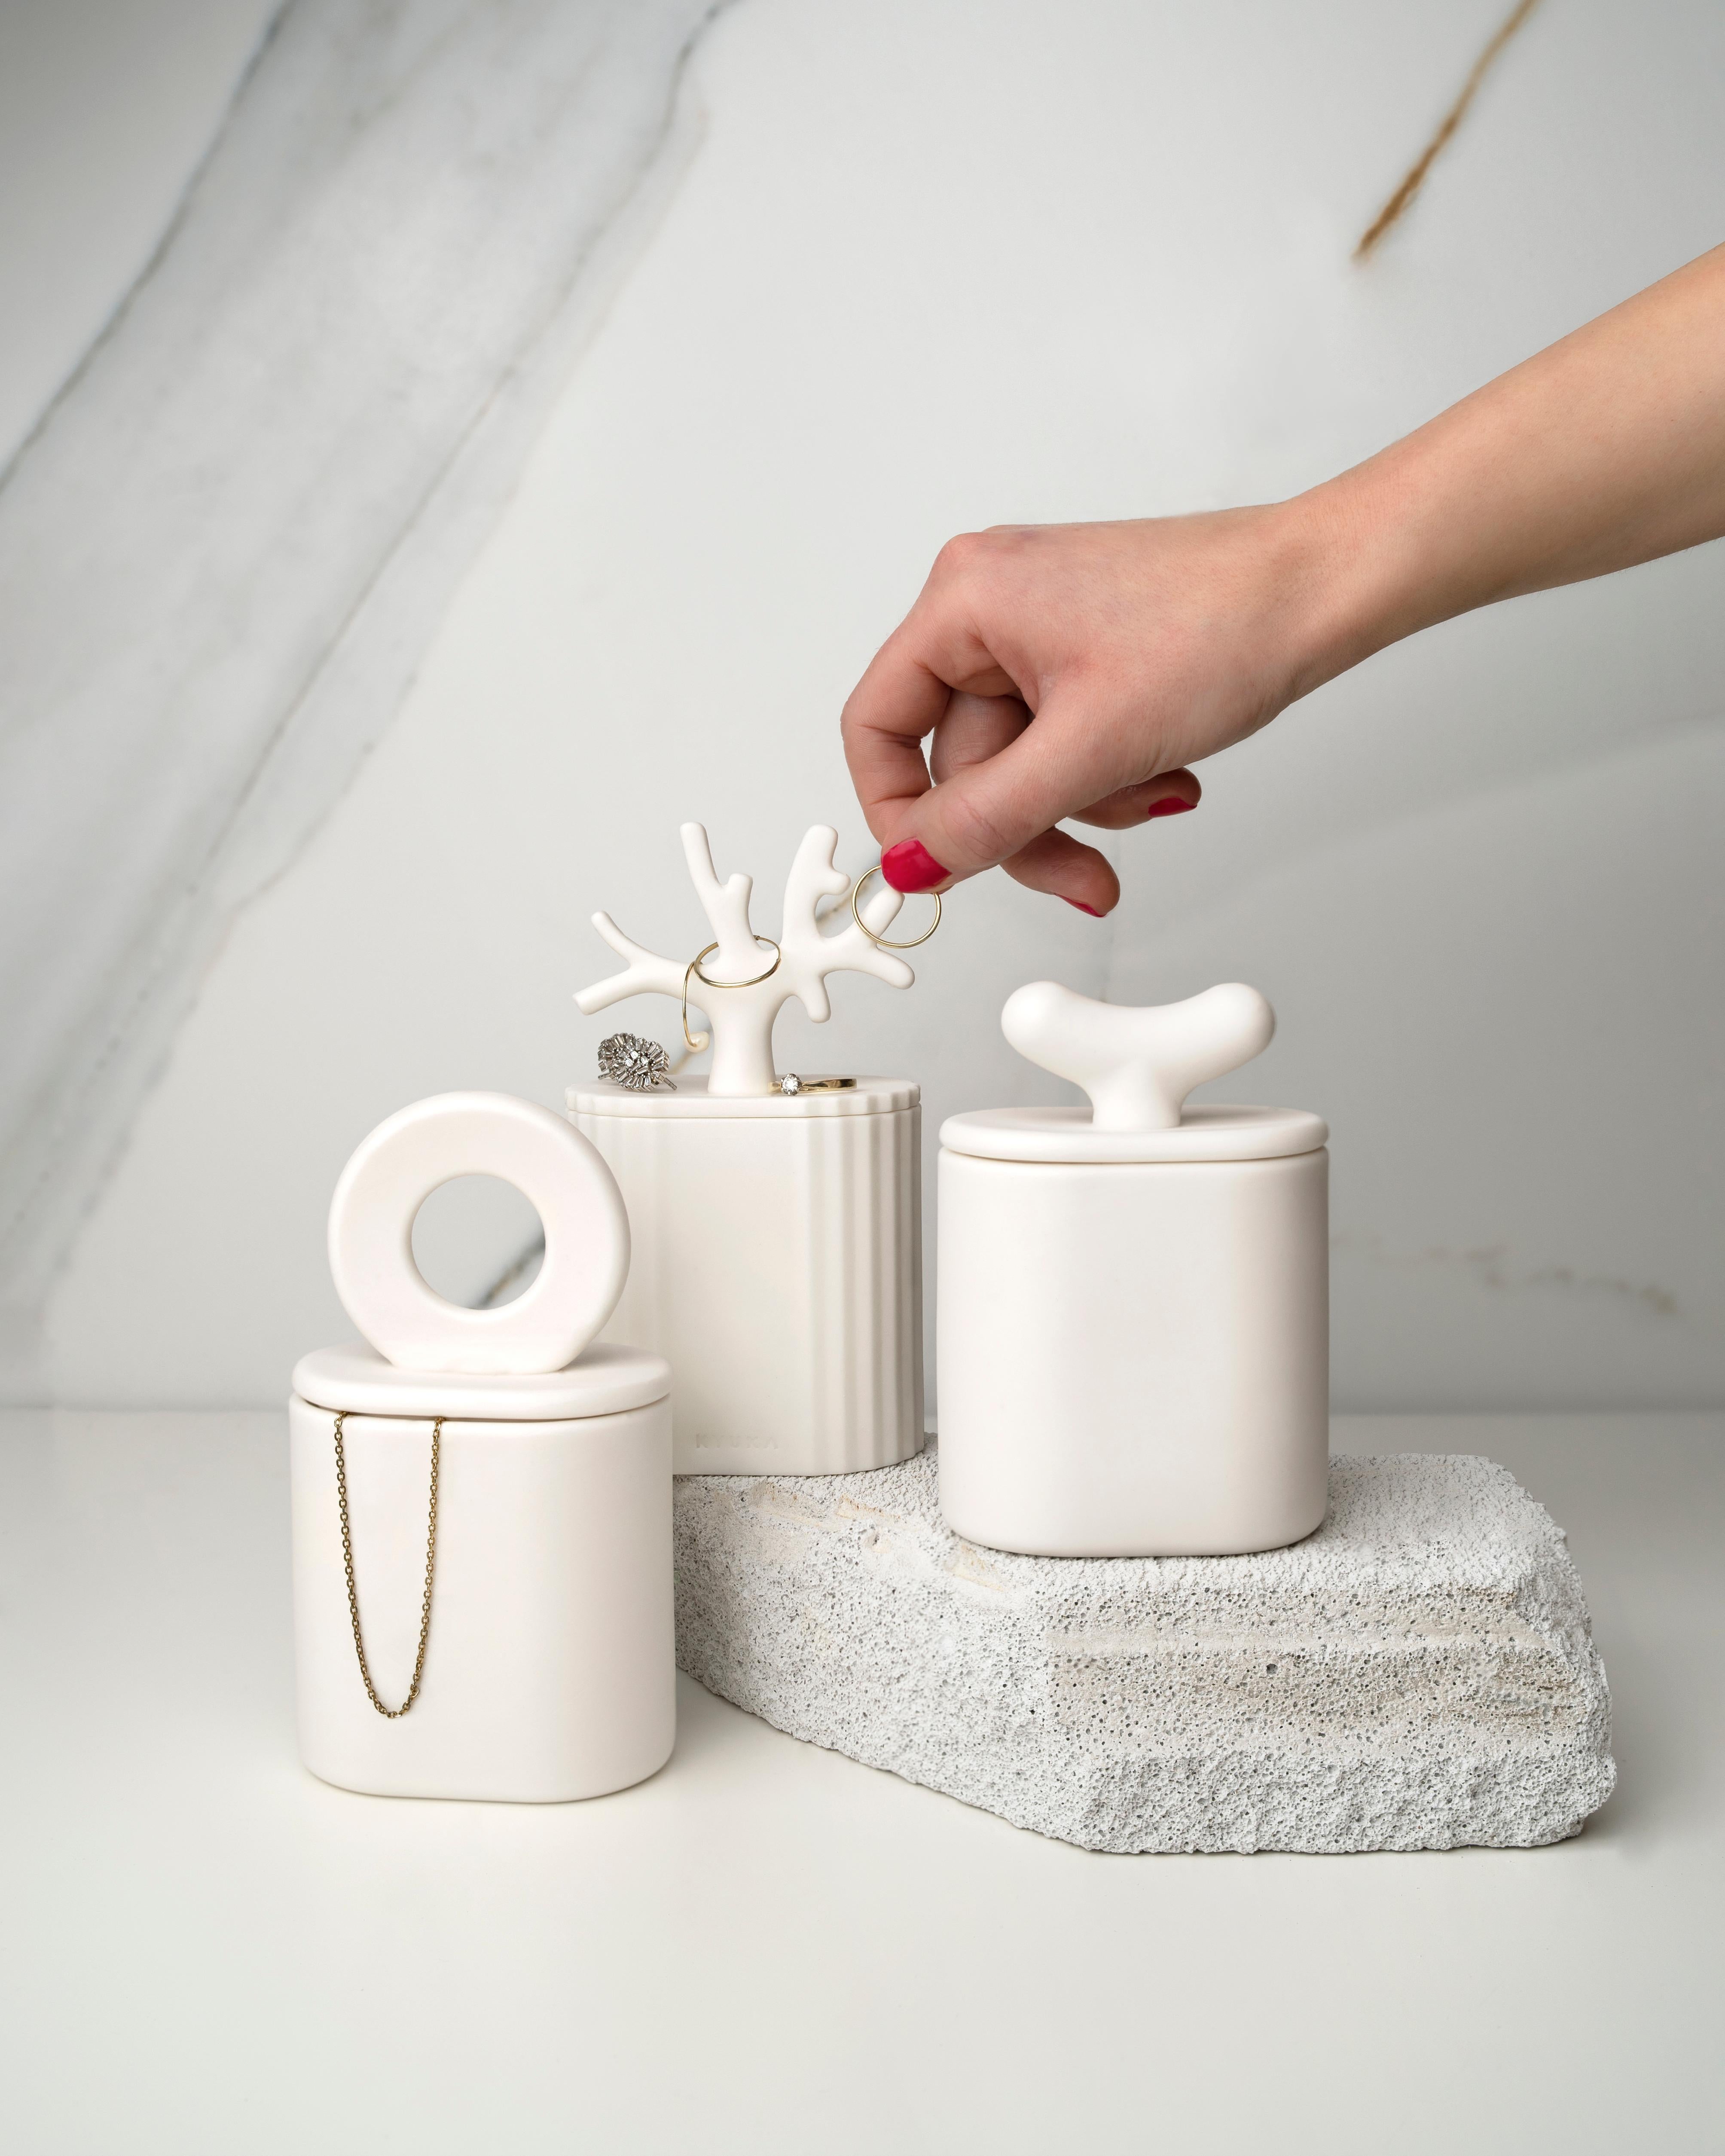 Ki  -  in Japanese means tree. A minimalist ceramic container, Parian porcelain. 

A collection inspired by nature and classical forms.

Parian porcelain vessels, unglazed.

• 160 g natural soy wax

• app 30 h burn time

• wooden wick

• fragrance